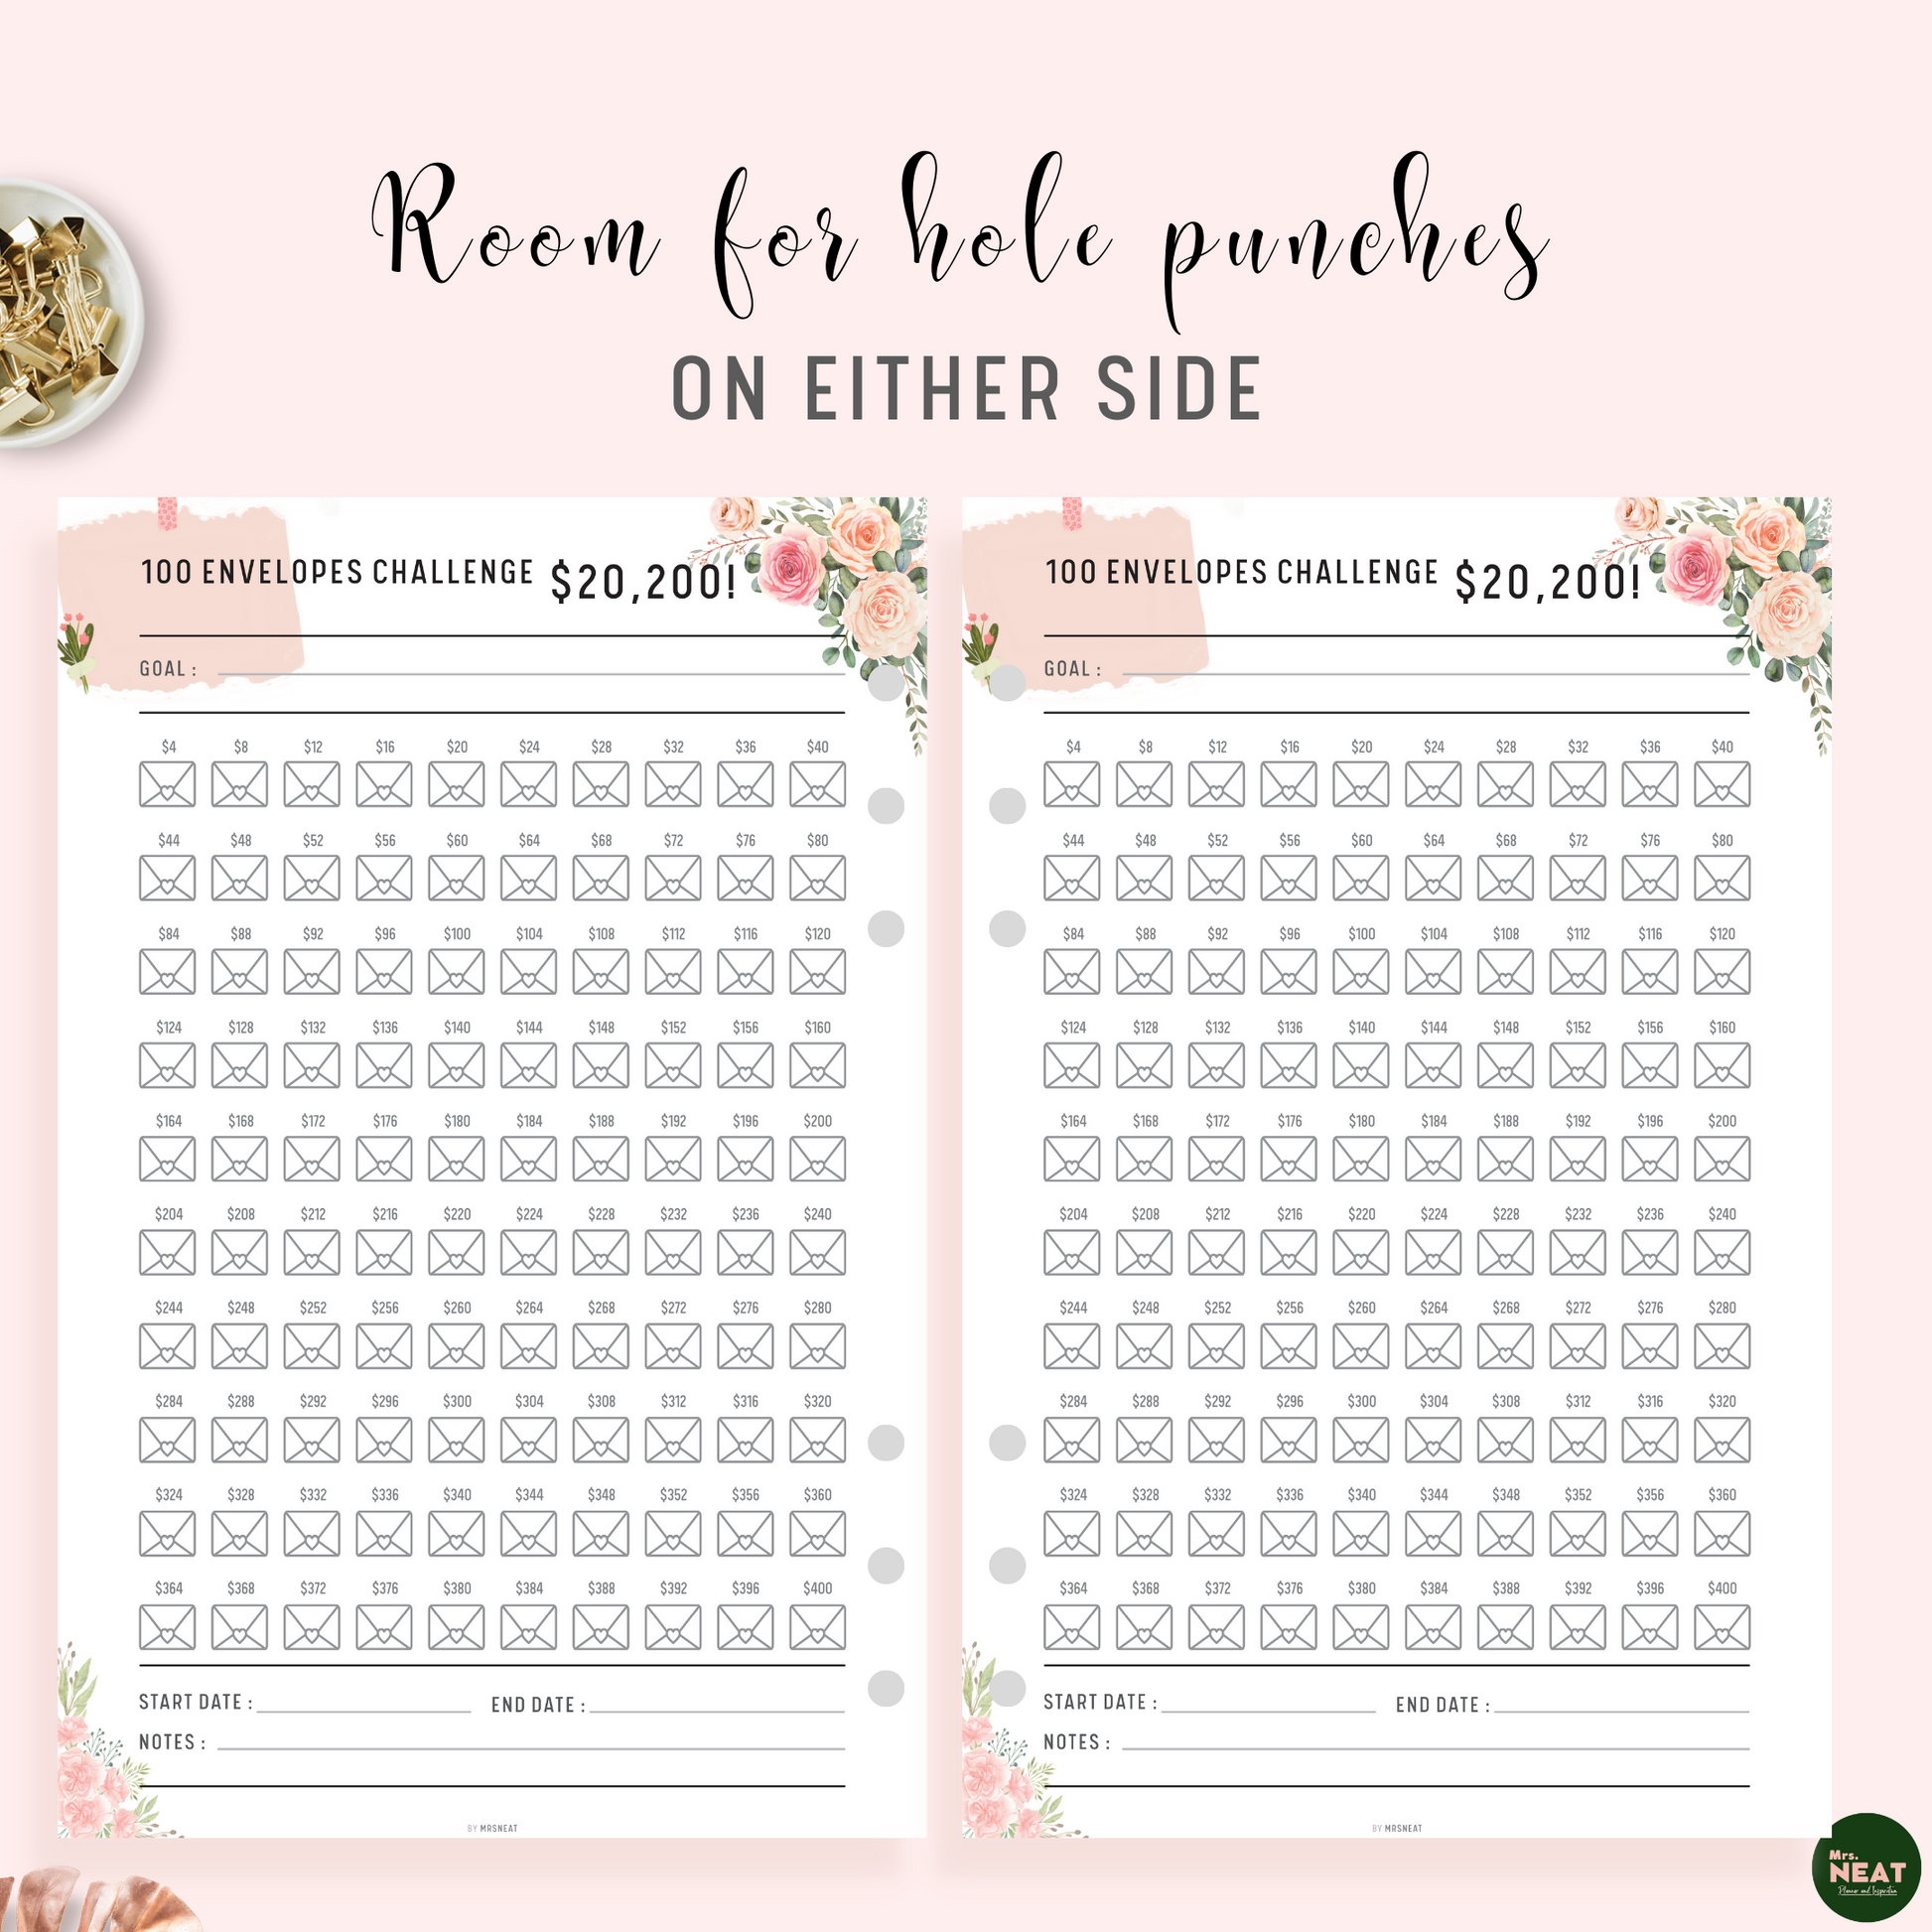 Saved $20,200 in 100 Envelope Beautiful Floral Saving Challenge Planner with room for hole punches on either side